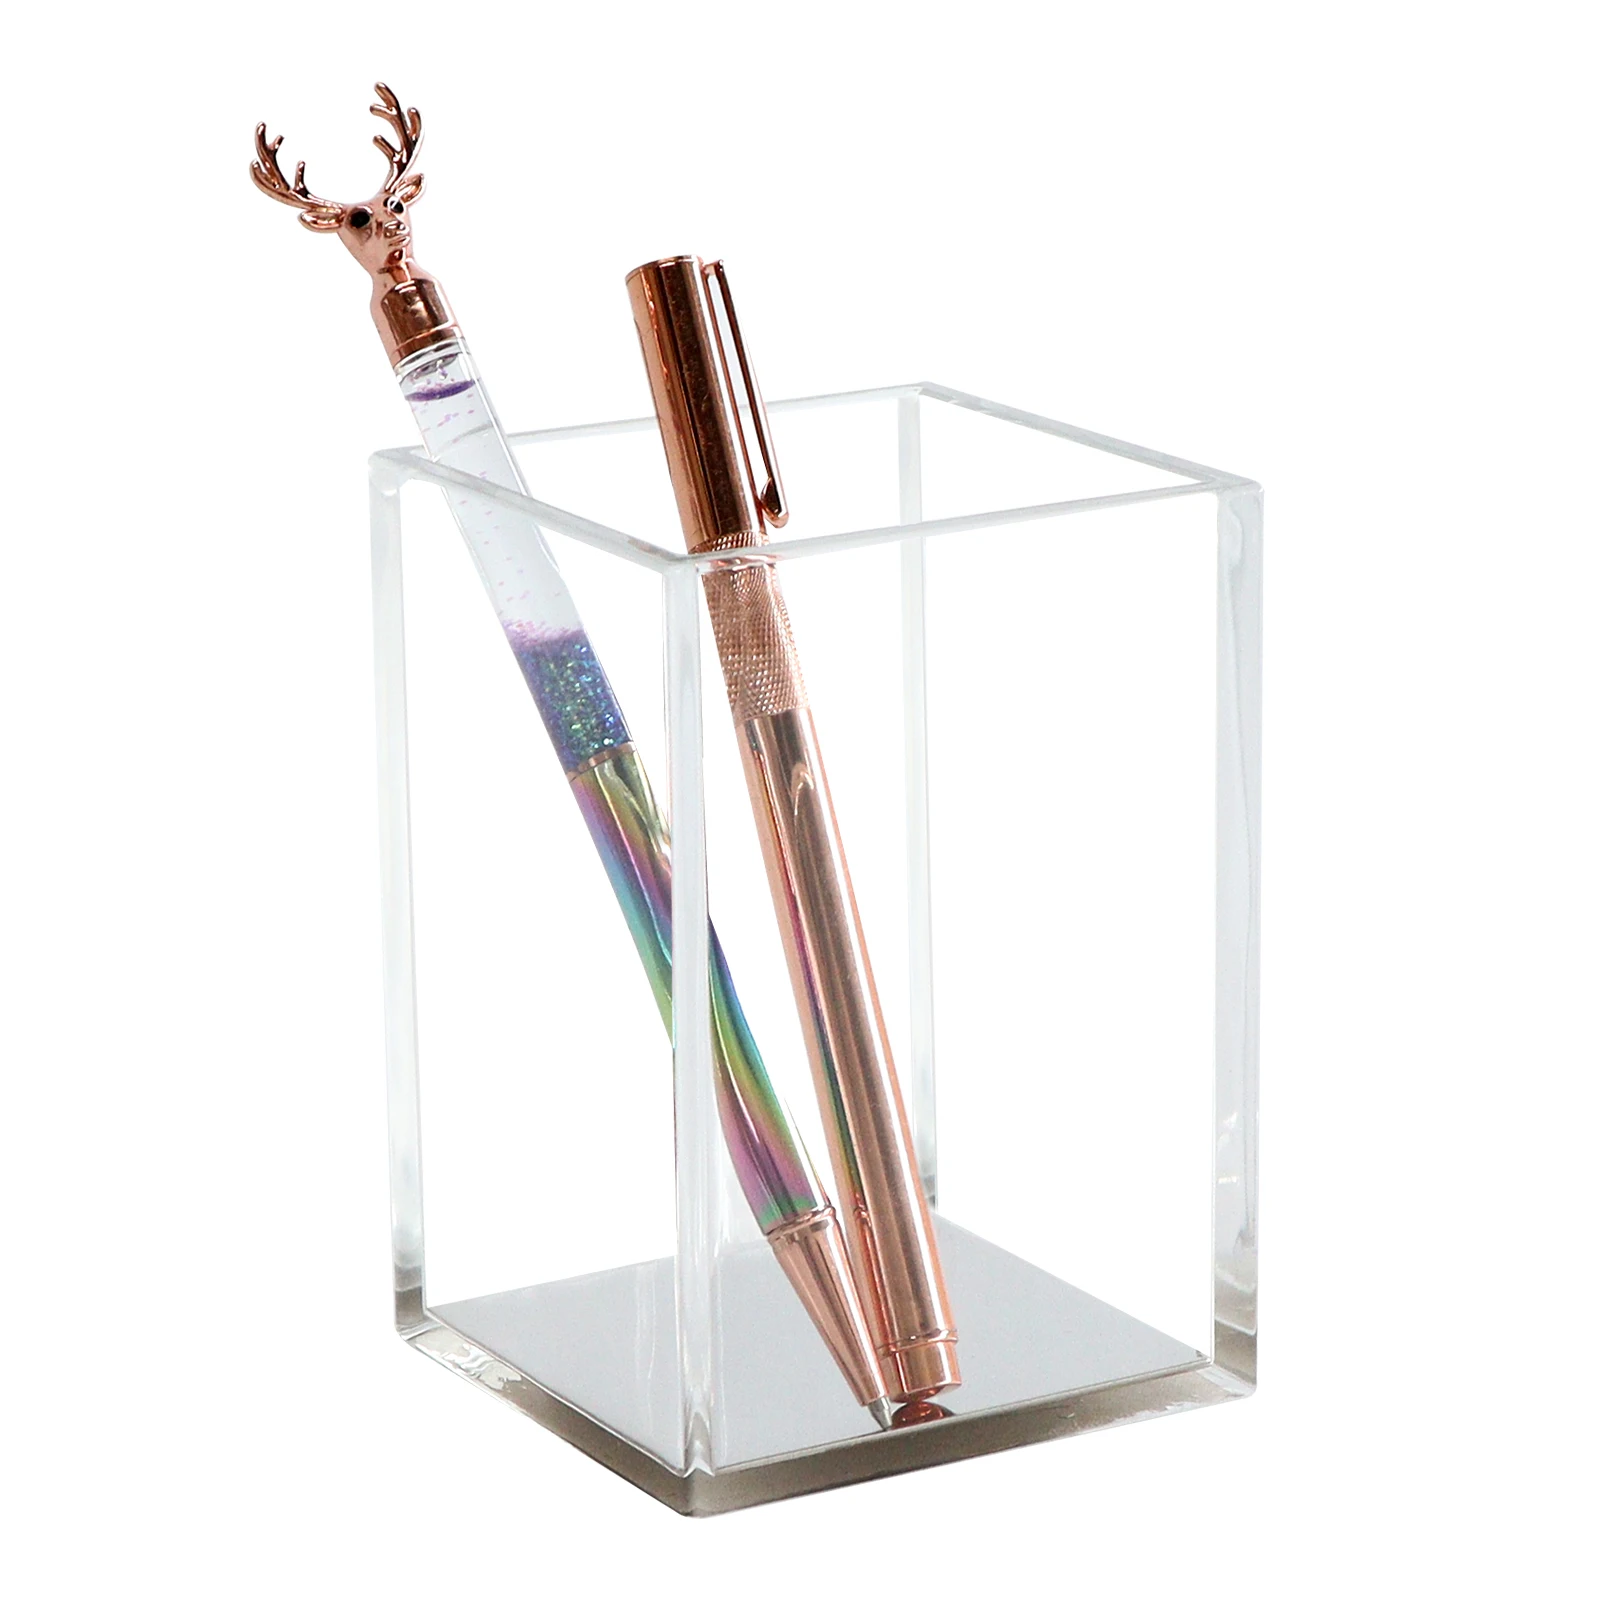 Clear Acrylic Silver Pen Holder Can Be Used For Vase Pencils And Other Stationery Desktop Office Storage Supplies